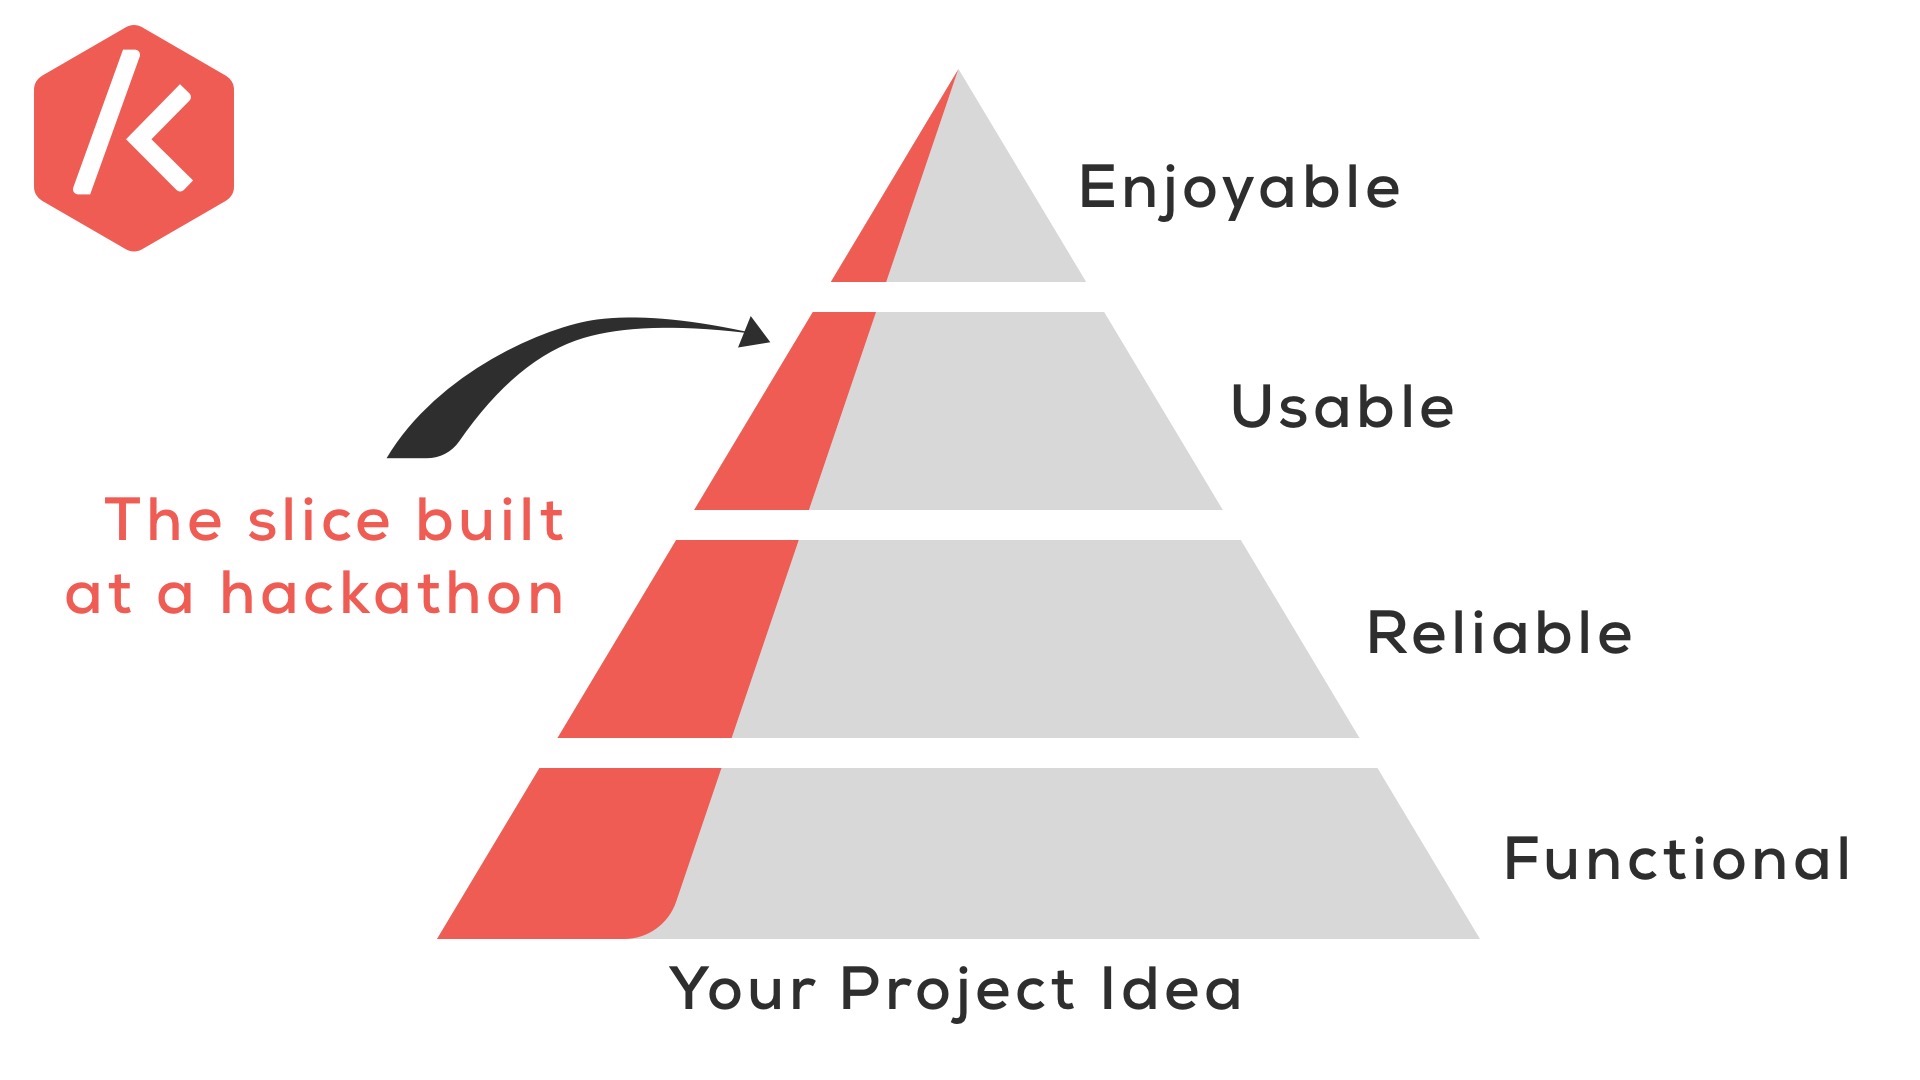 Your hackathon project should aim to be functional, reliable, useable and enjoyable, not just functional